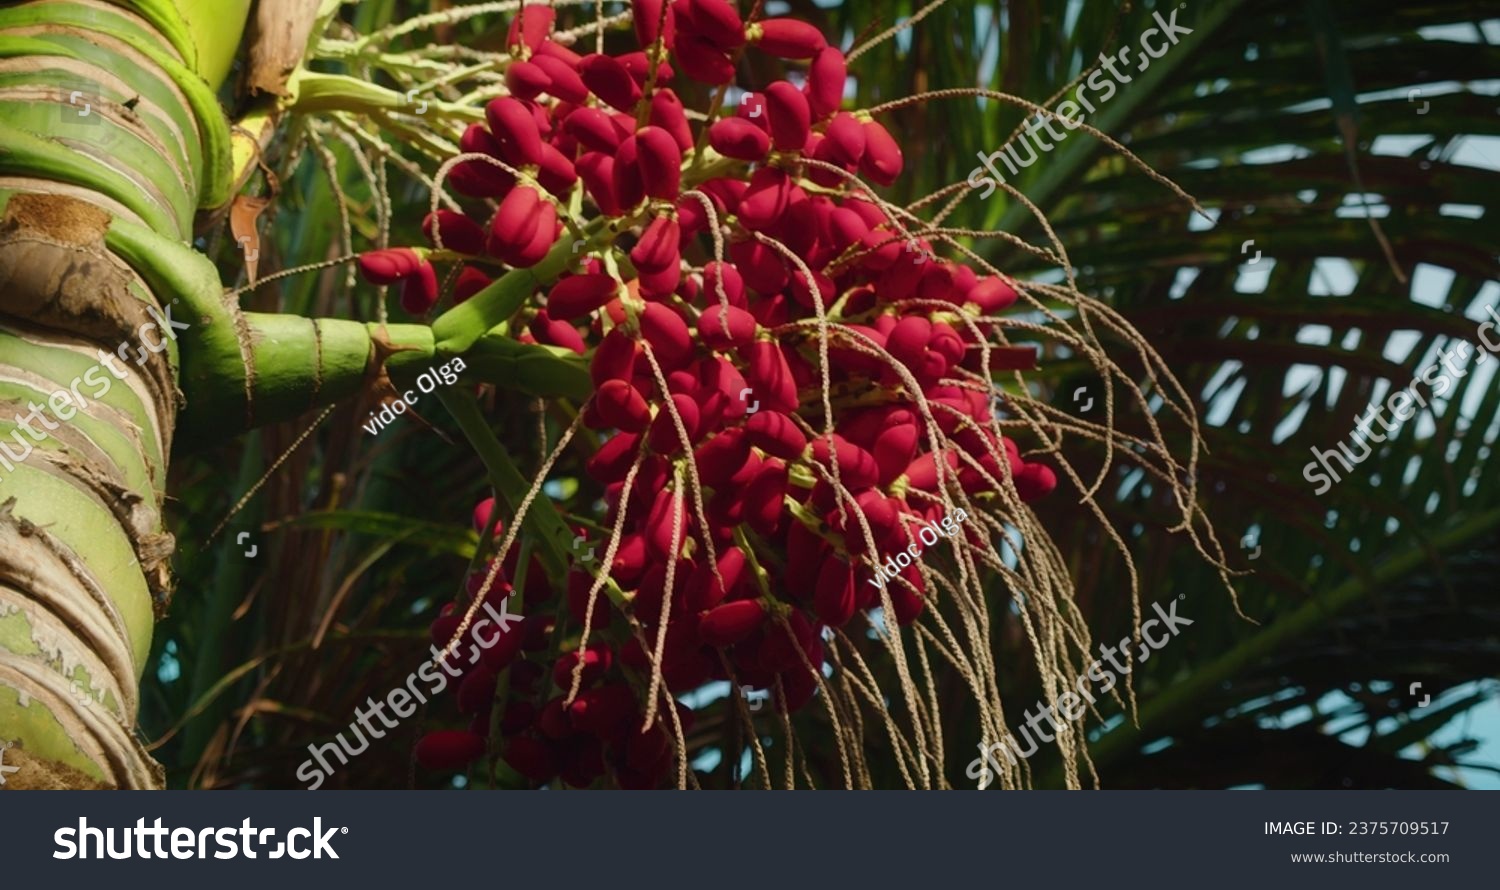 Close-up of Red betel nut on Areca palm tree. Fruits ripen on a tree in the wild. Bunch swaying in the wind. #2375709517